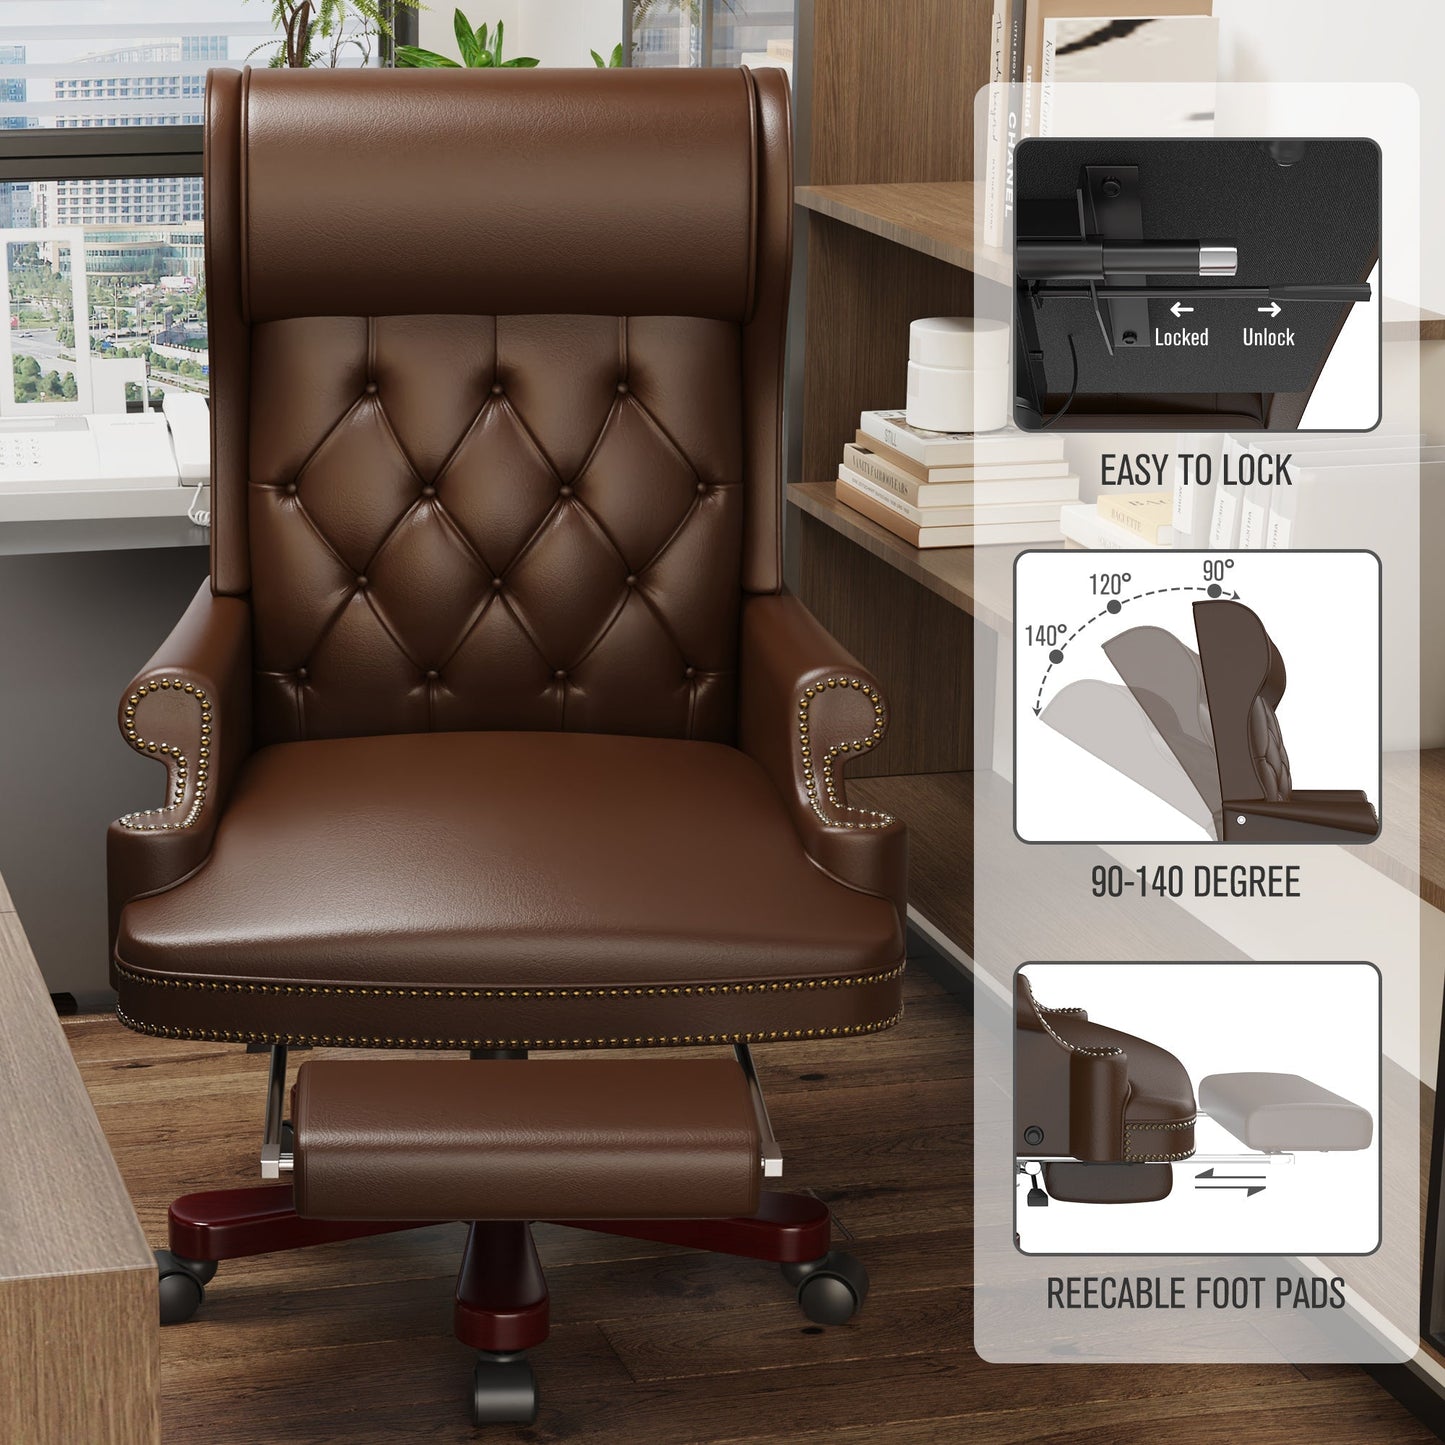 330LBS Executive Office Chair with Footstool, Ergonomic Design High Back Reclining Comfortable Desk Chair - Brown